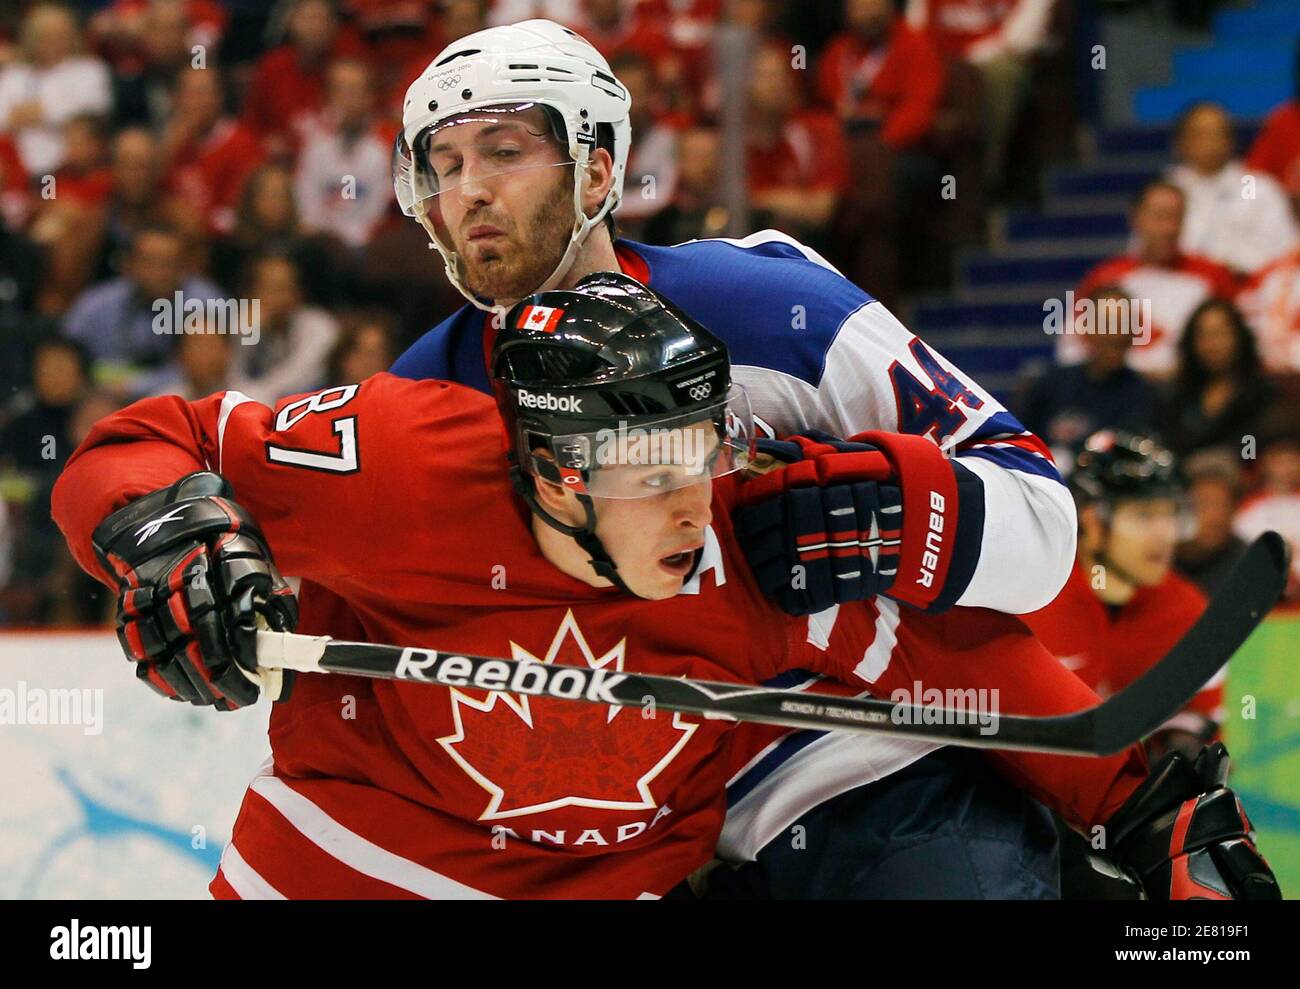 Sidney Crosby of Canada is held back by Brooks Orpik of the U.S. during  their hockey game at the Vancouver 2010 Winter Olympics, February 21, 2010.  REUTERS/Hans Deryk (CANADA Stock Photo - Alamy